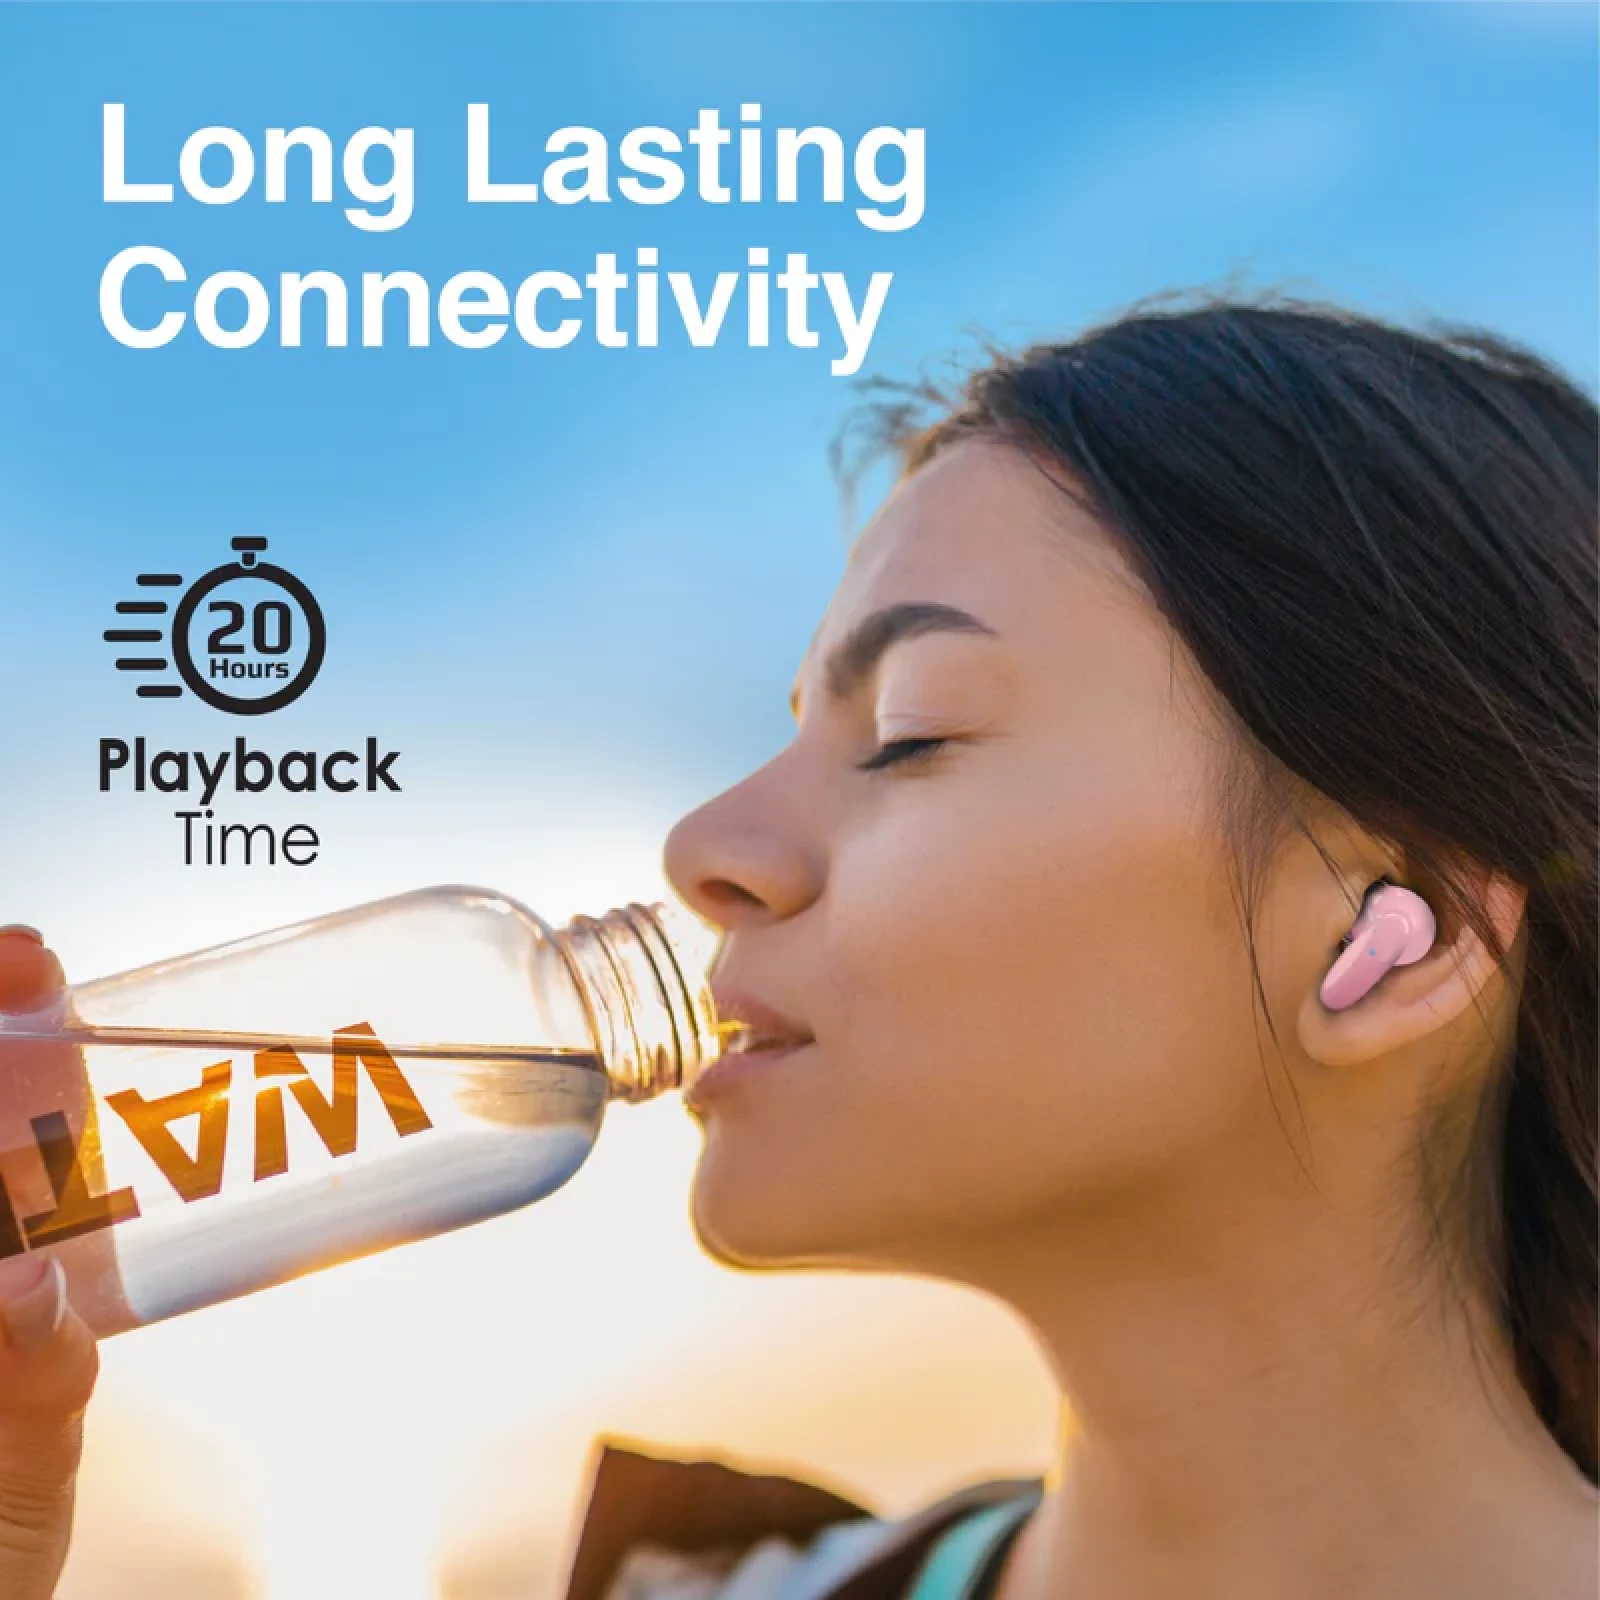 Безжични слушалки ProMate LUSH, Acoustic In-Ear TWS Bluetooth v5.1 Earphone • 19-Hour Playback • Ergonomic Fit Earbuds • Stable Connectivity, Розов